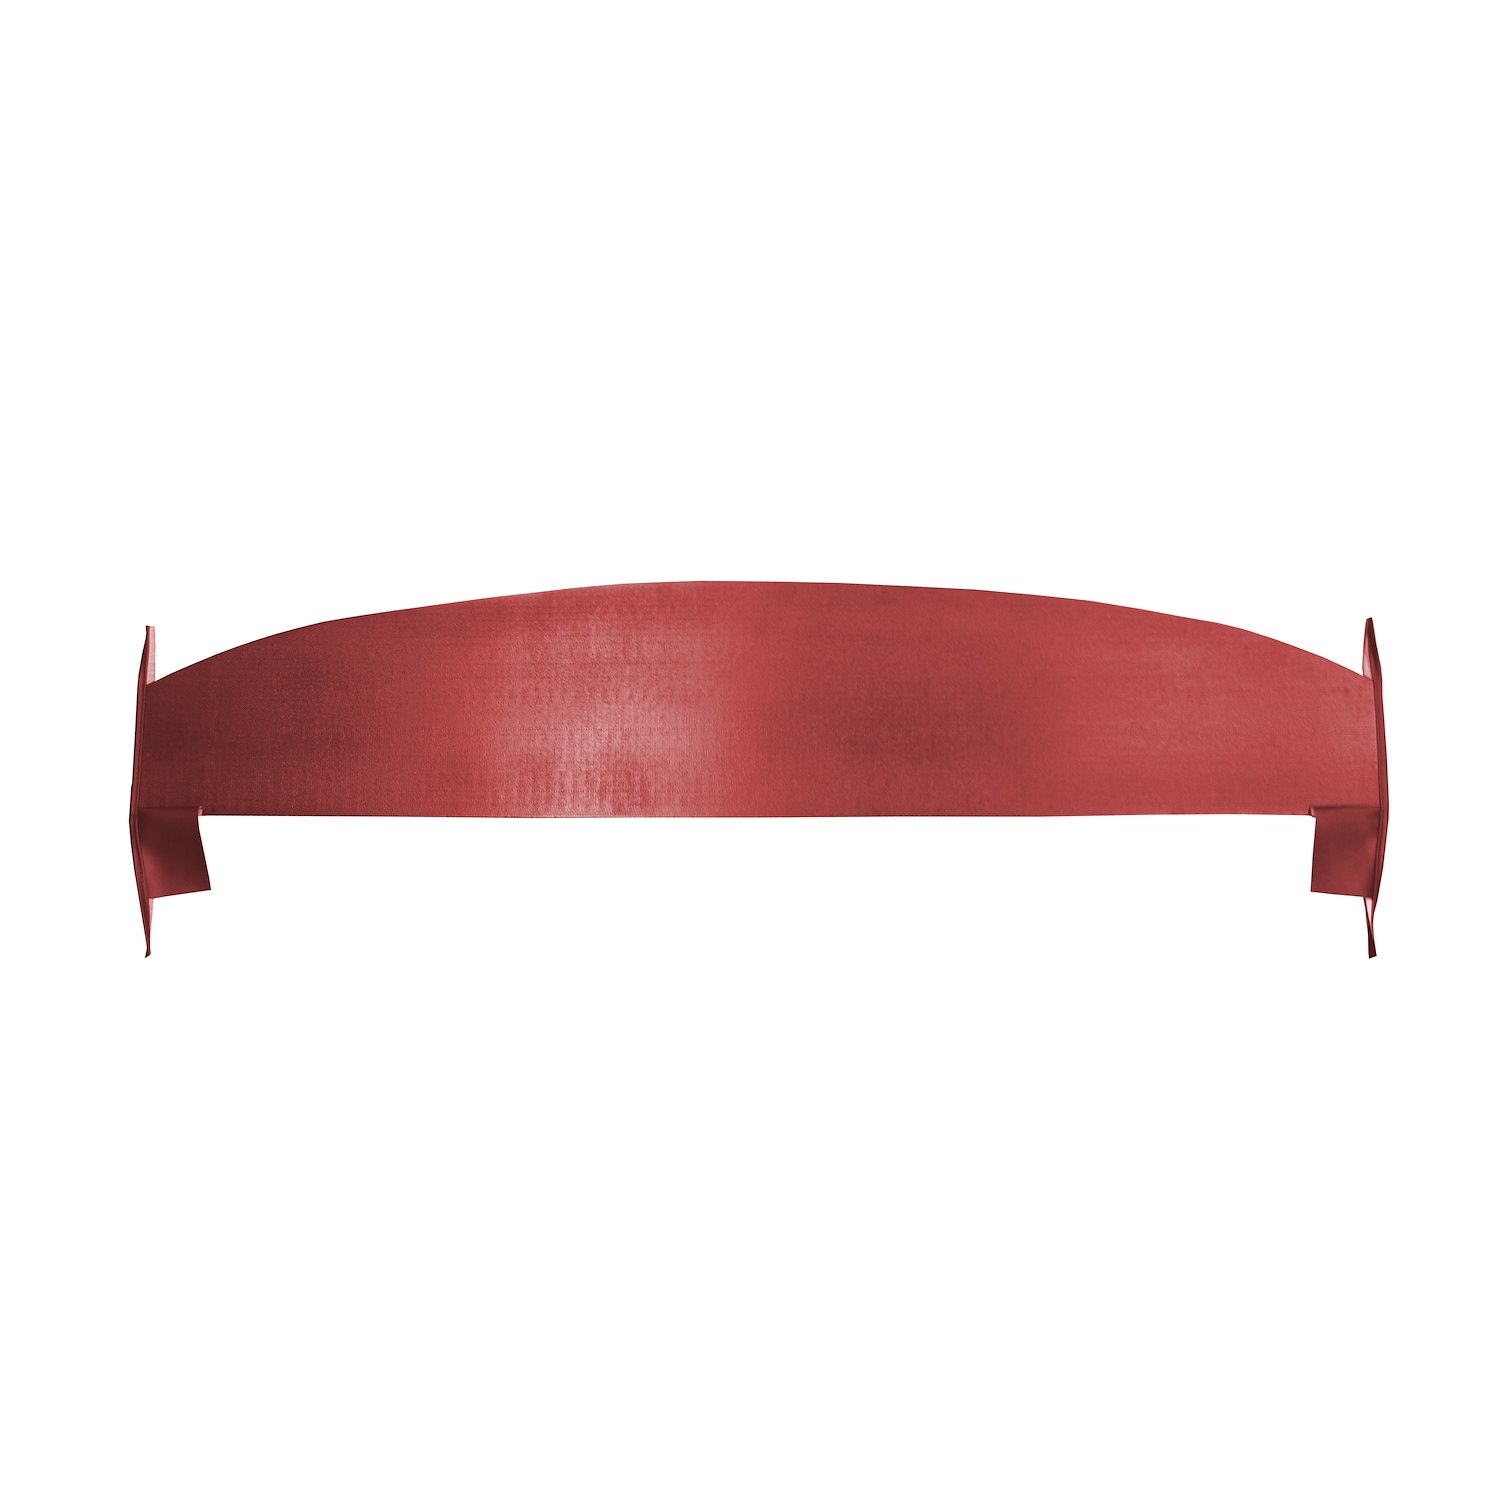 PT65CF03N 65/66 FURY/POLARA PACKAGE TRAY W/OUT CUTS -RED